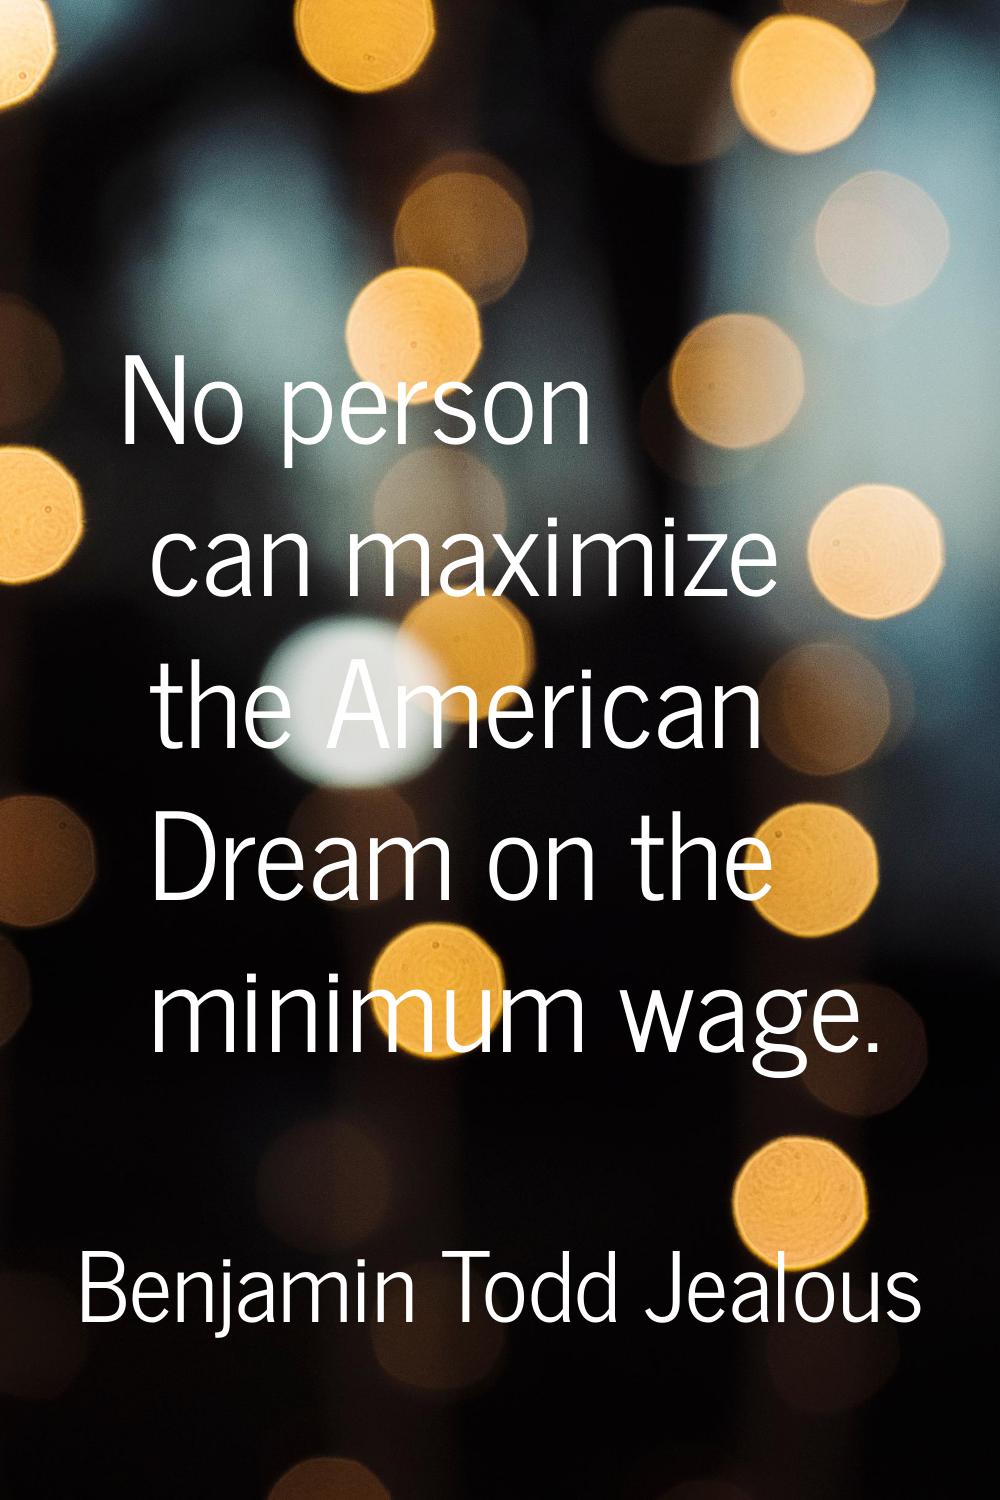 No person can maximize the American Dream on the minimum wage.